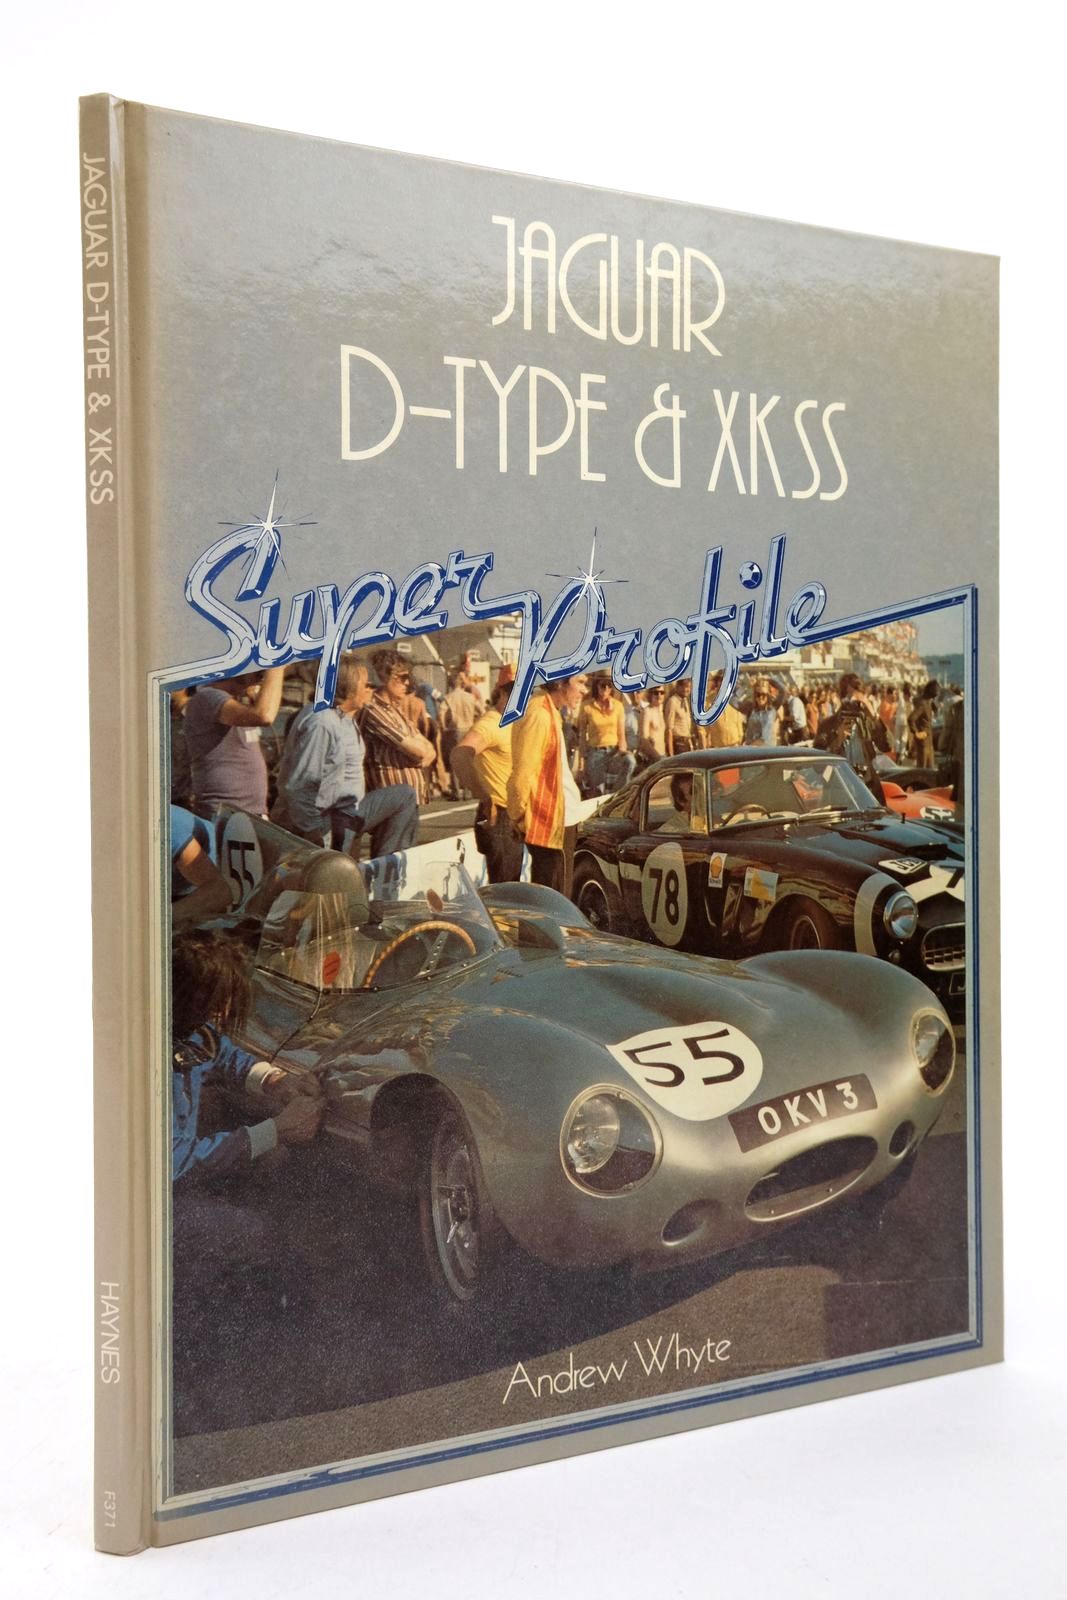 Photo of JAGUAR D-TYPE & XKSS written by Whyte, Andrew published by Haynes Publishing Group (STOCK CODE: 2139541)  for sale by Stella & Rose's Books